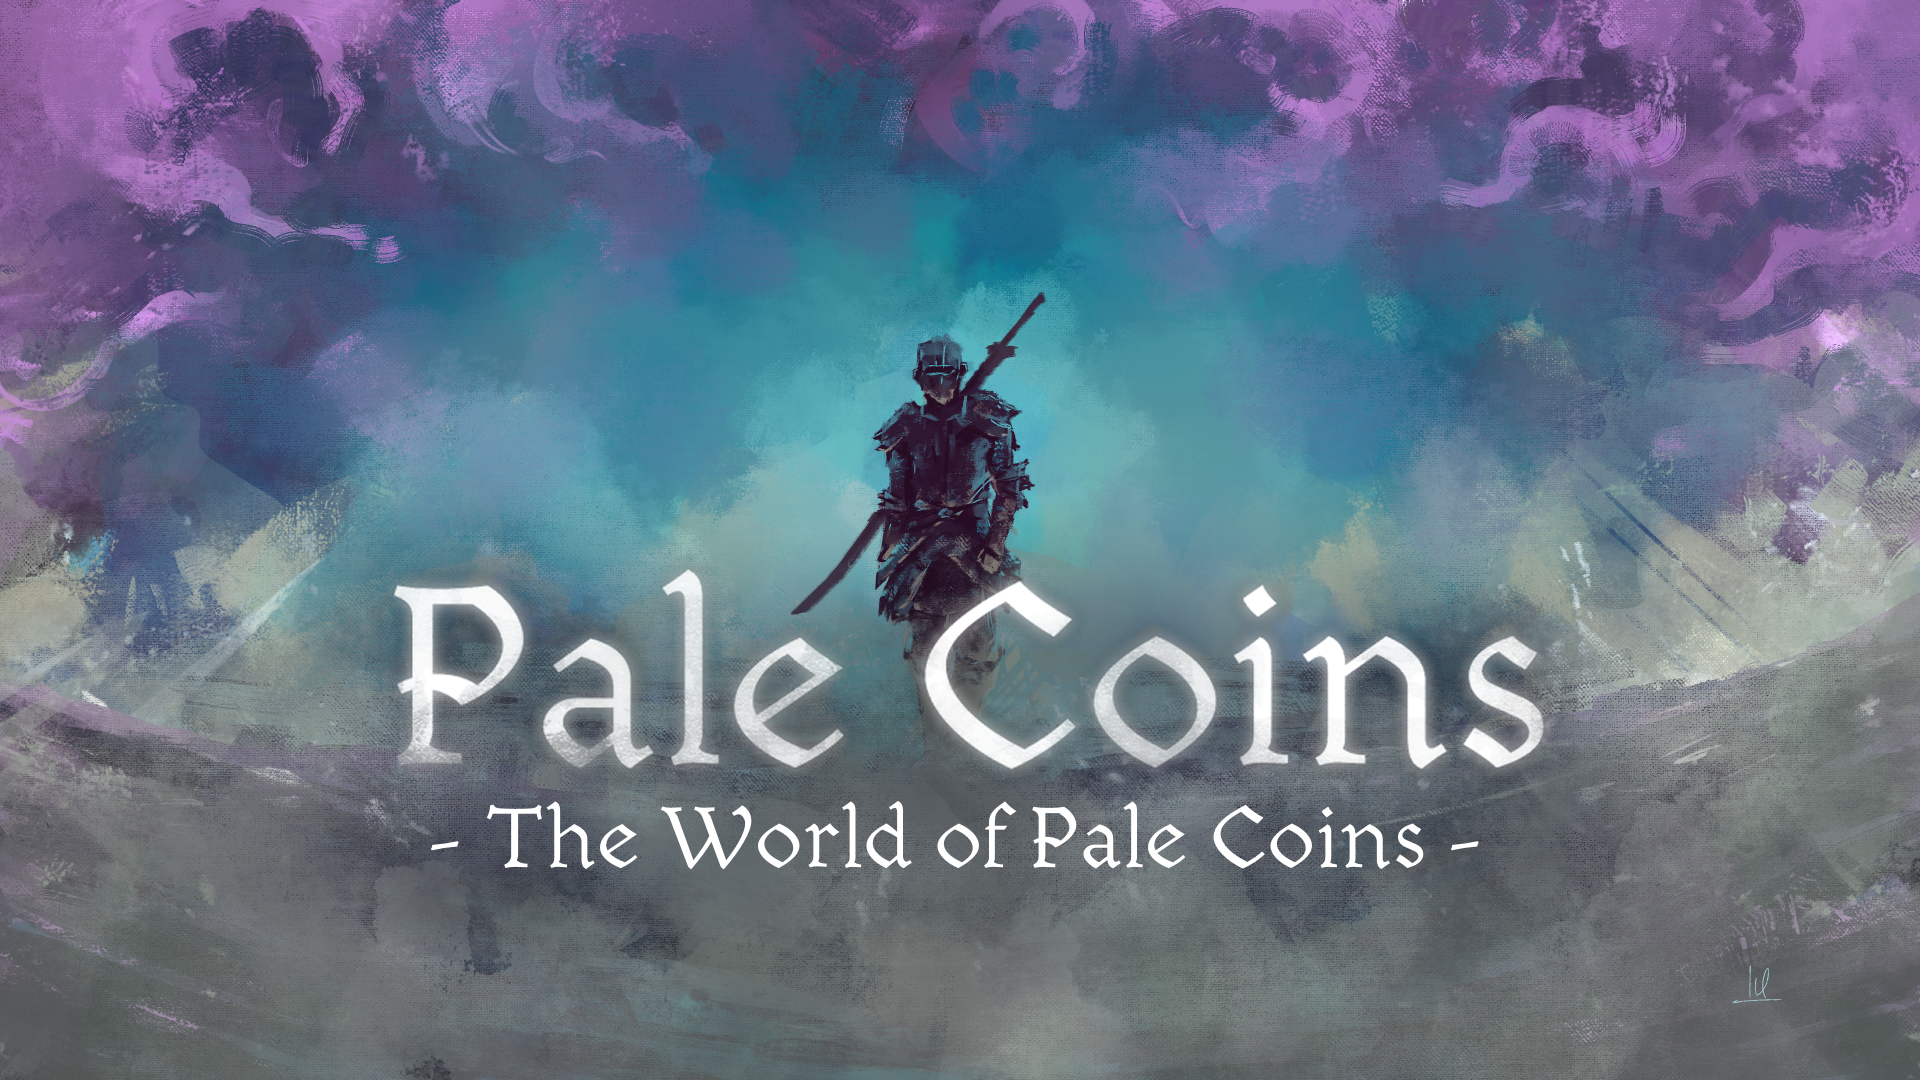 The World of Pale Coins